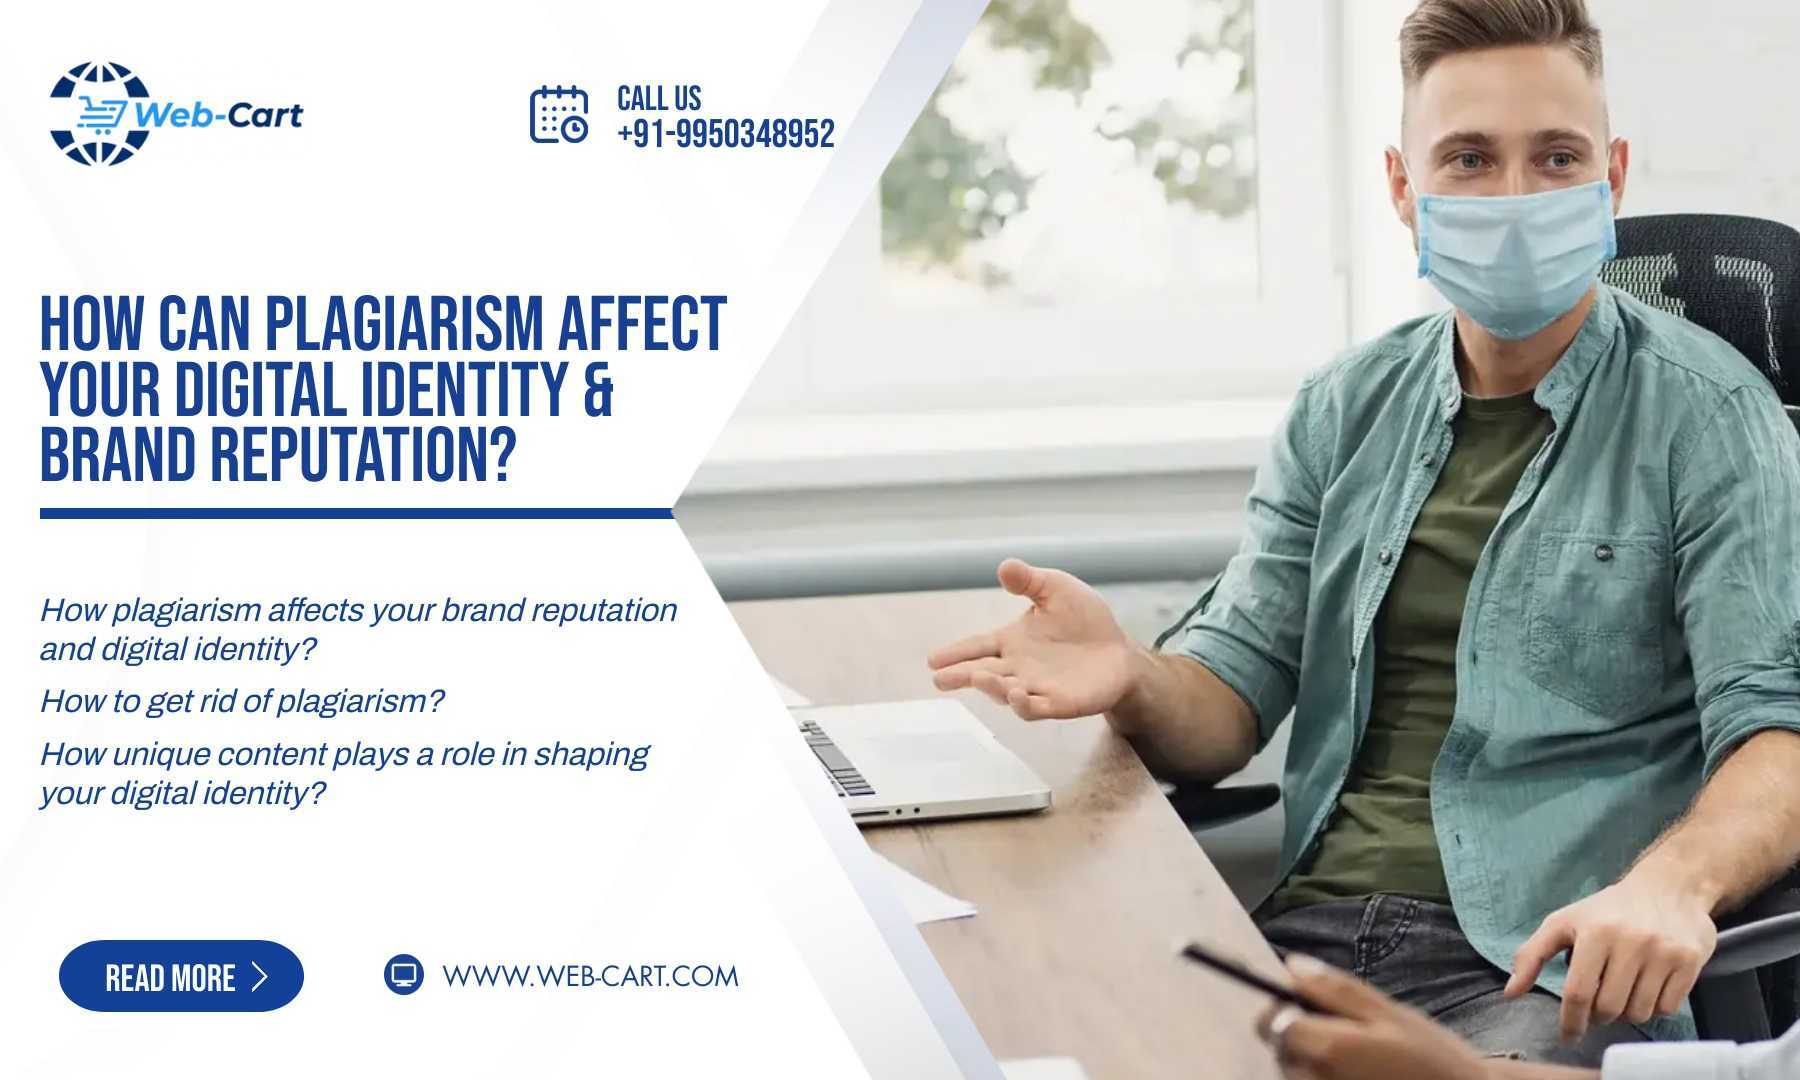 How can plagiarism affect your digital identity & brand reputation?